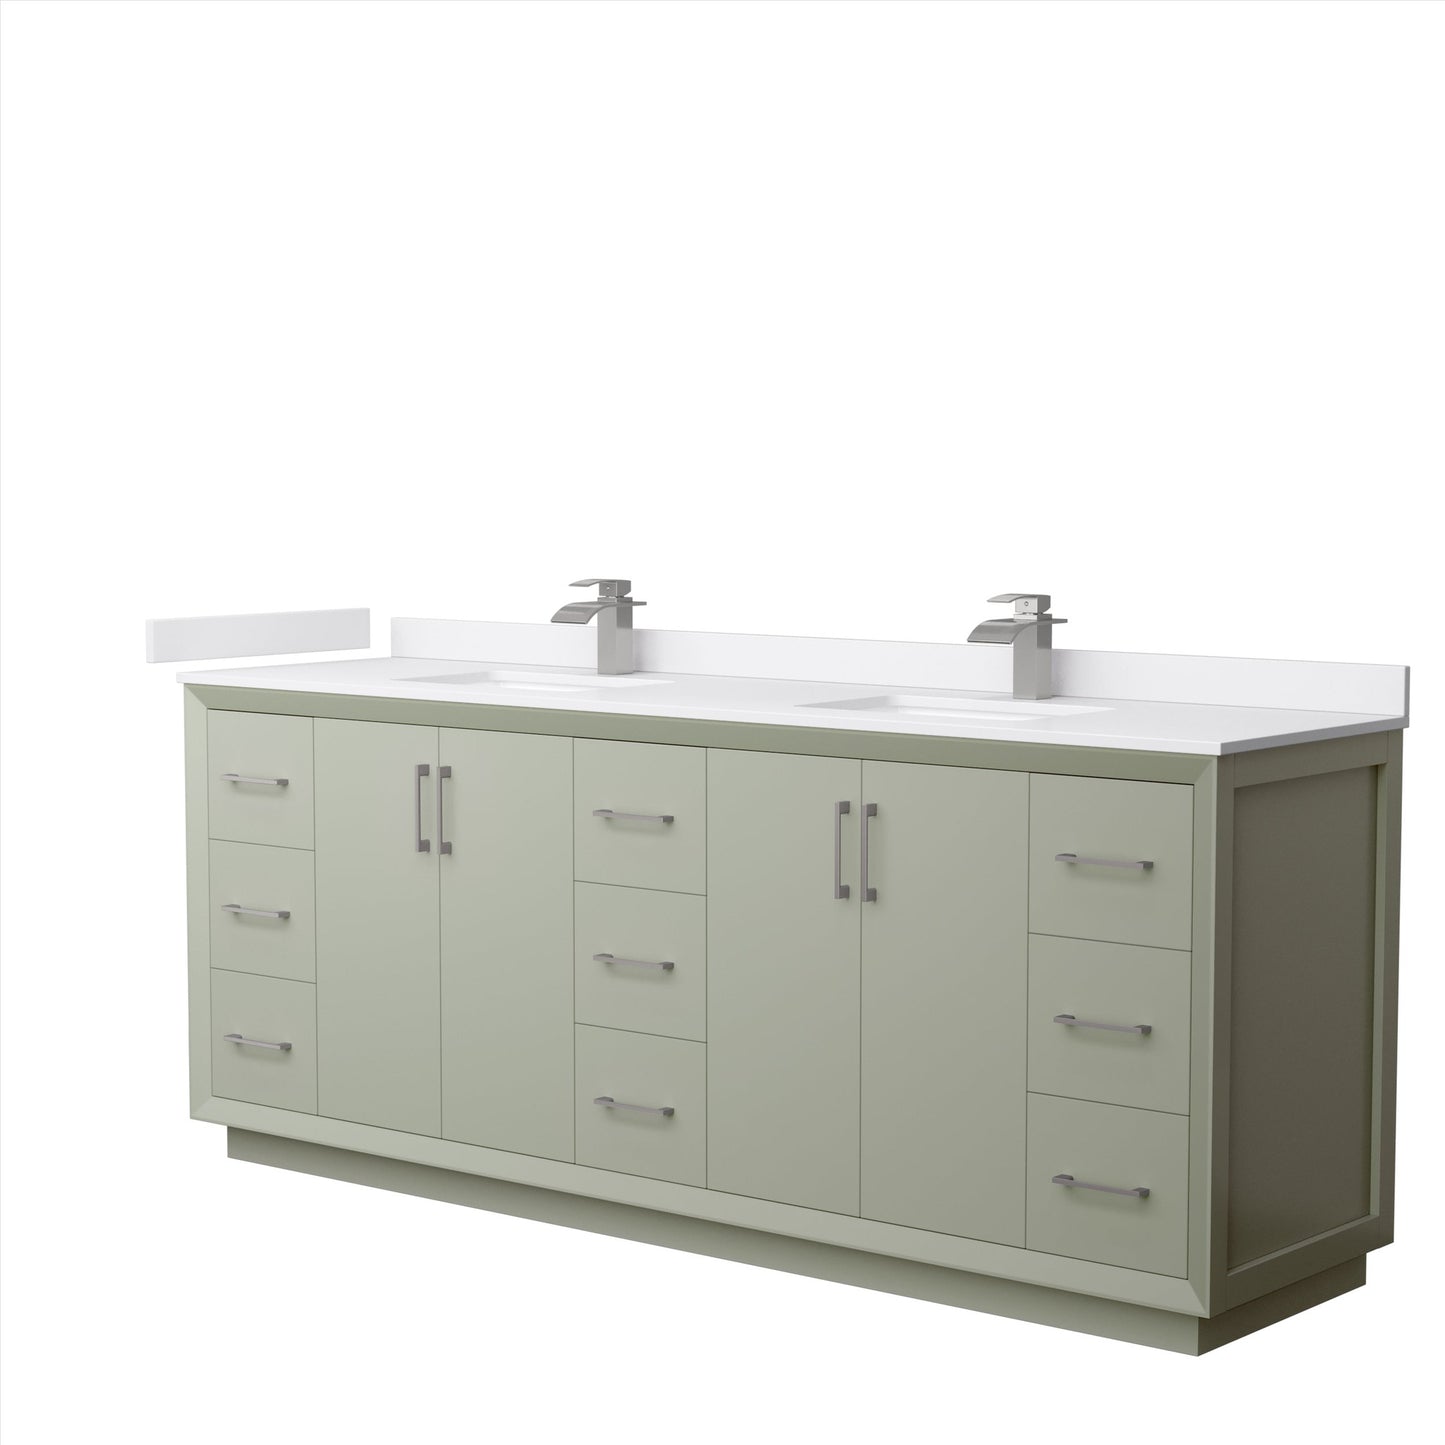 Wyndham Collection Strada 84" Double Bathroom Vanity in Light Green, White Cultured Marble Countertop, Undermount Square Sinks, Brushed Nickel Trim